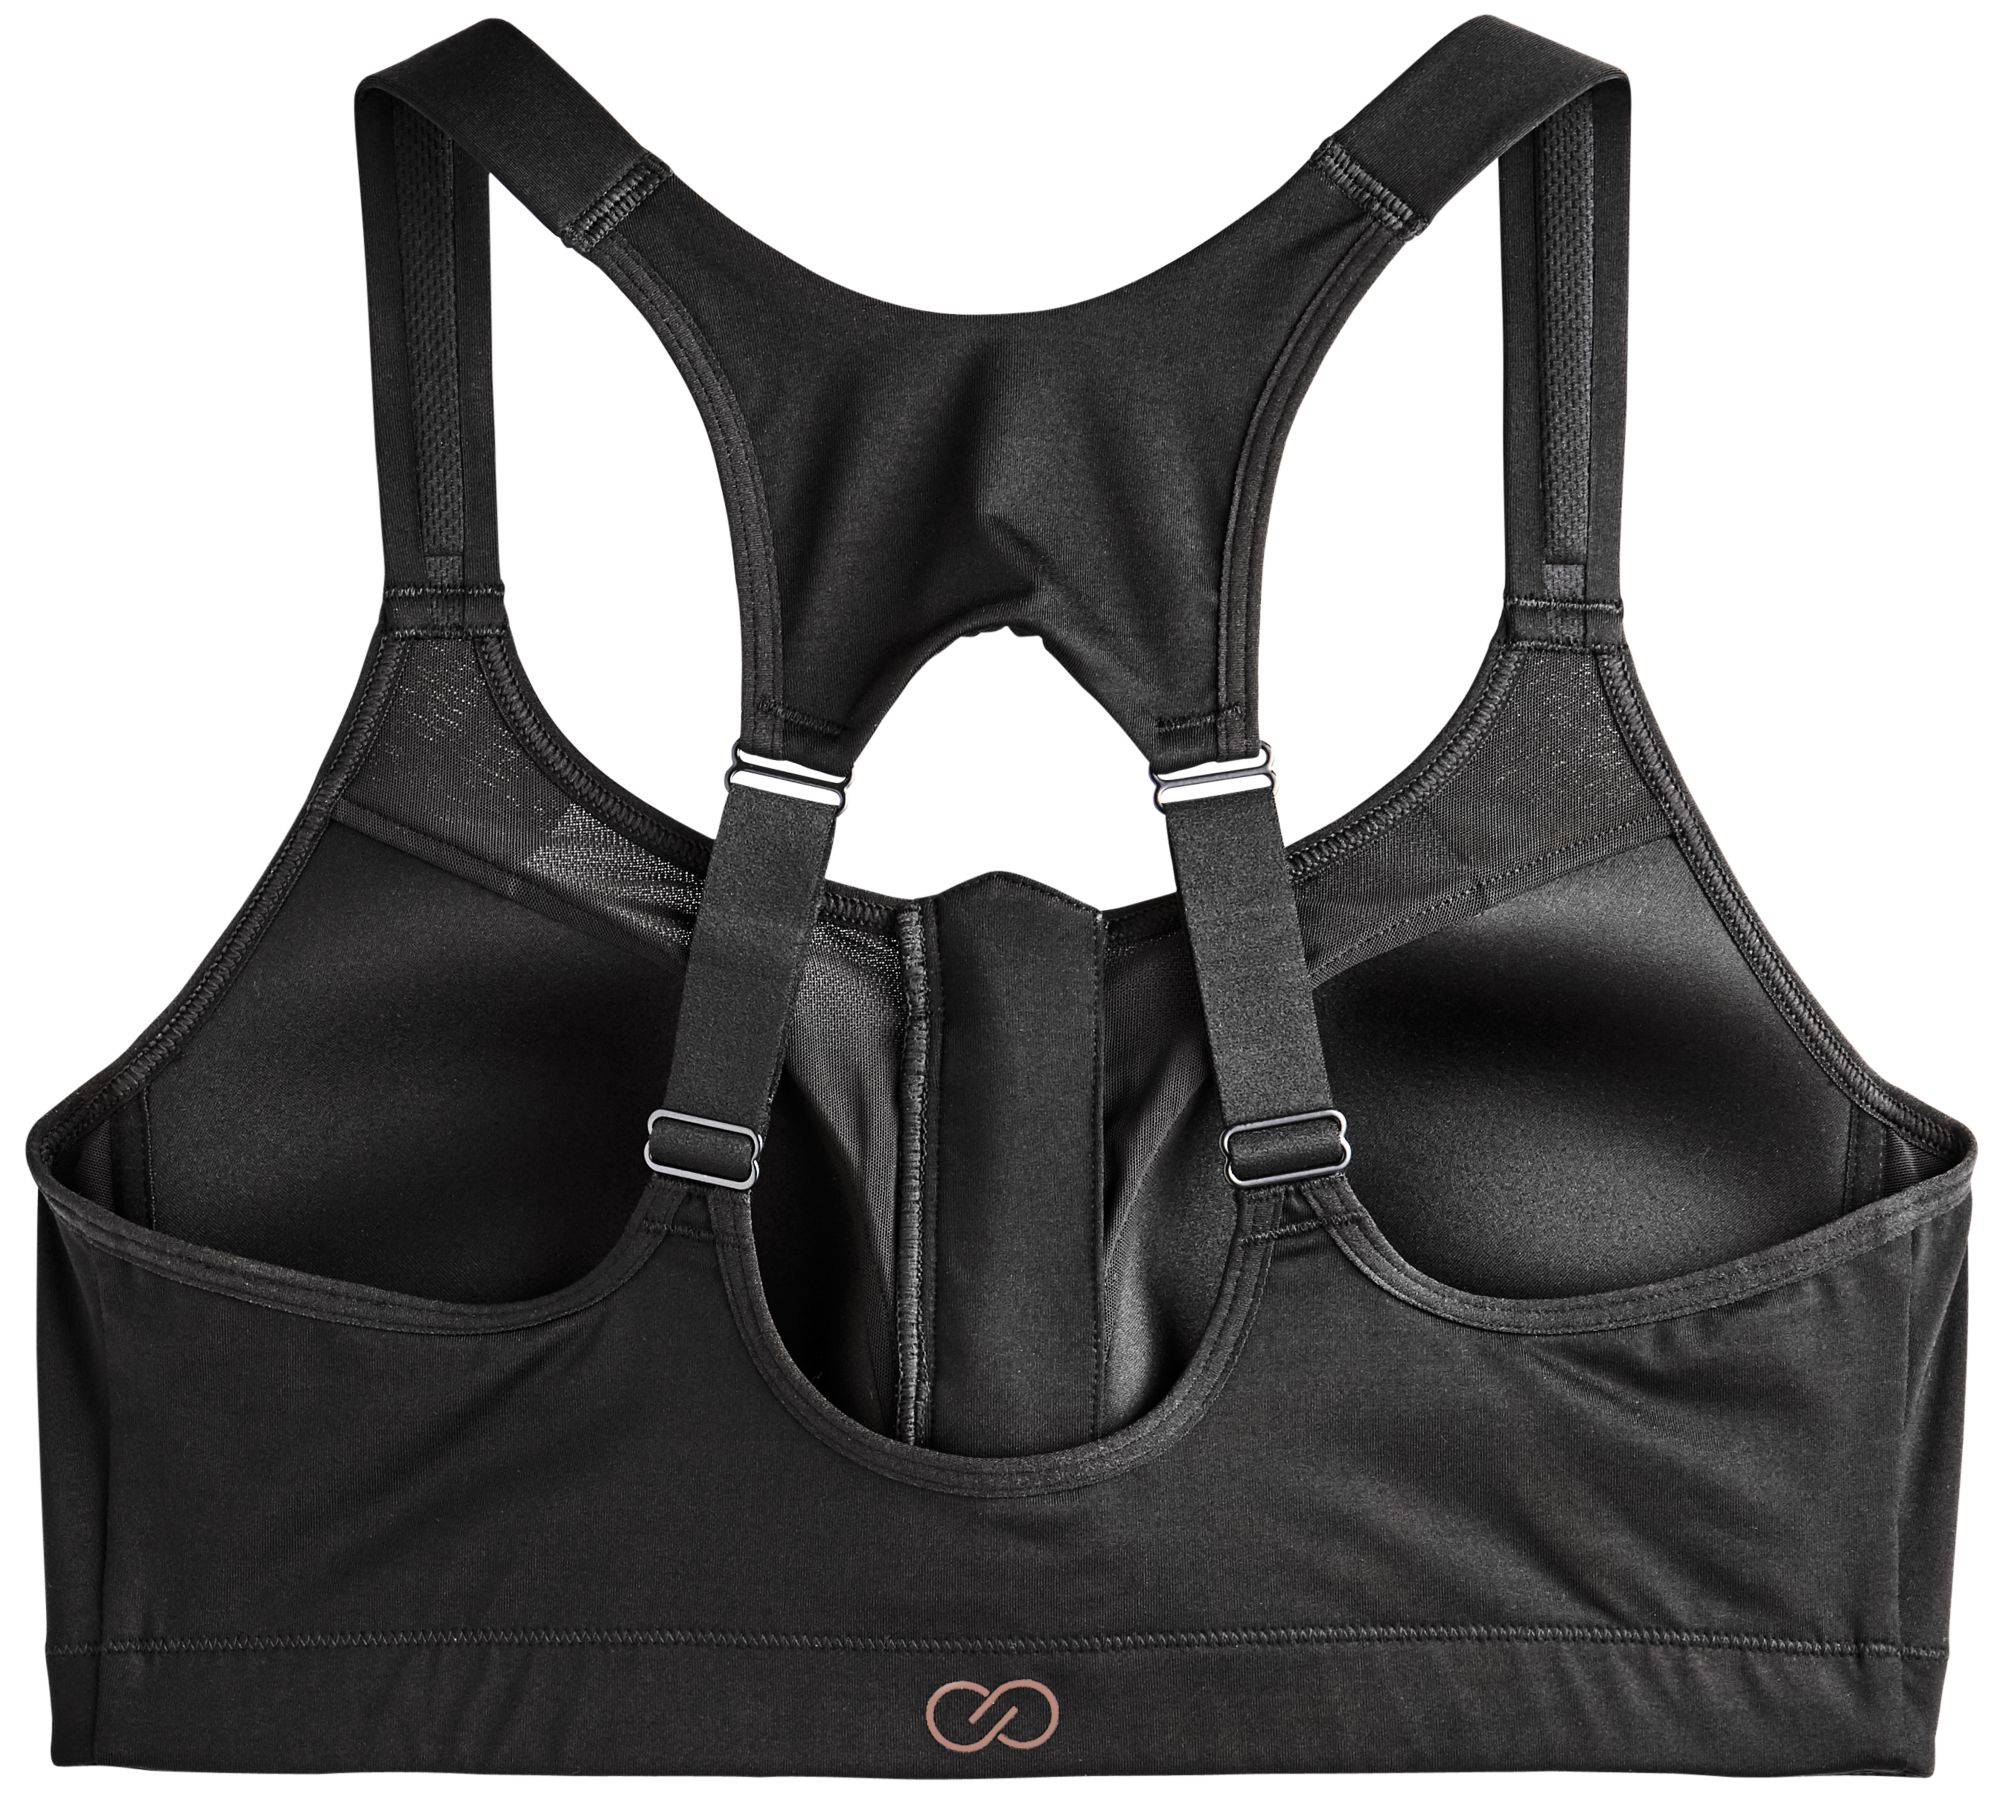 Calia / Women's Go All Out Zip Front Bra